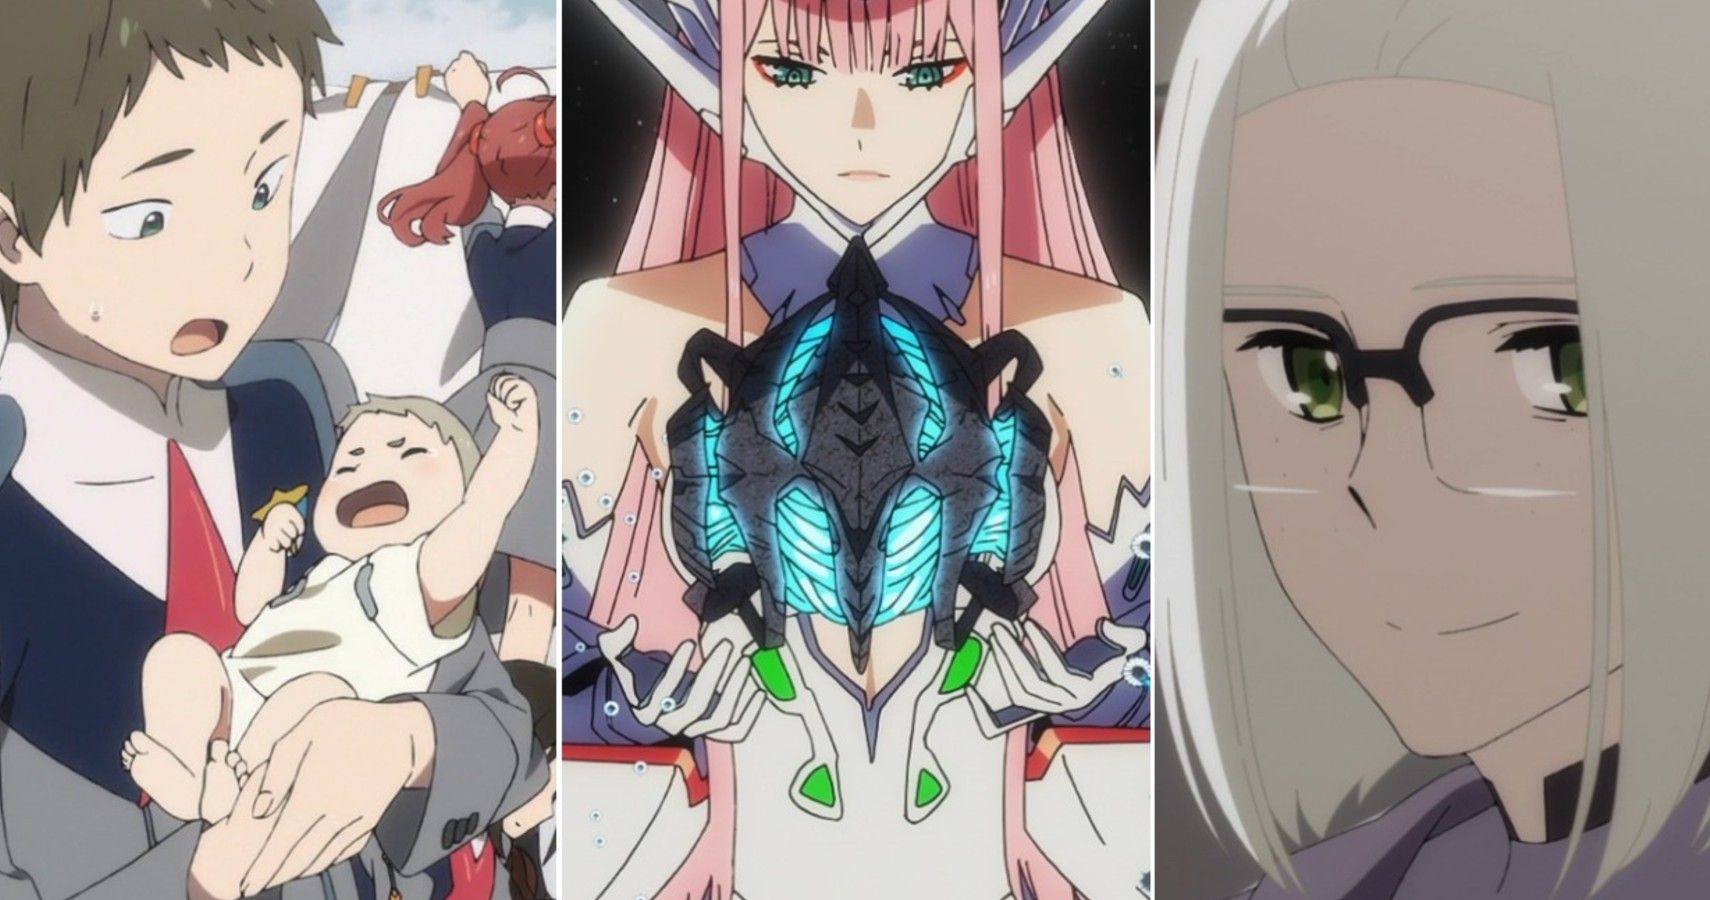 The Ending Of Darling In The FRANXX Explained